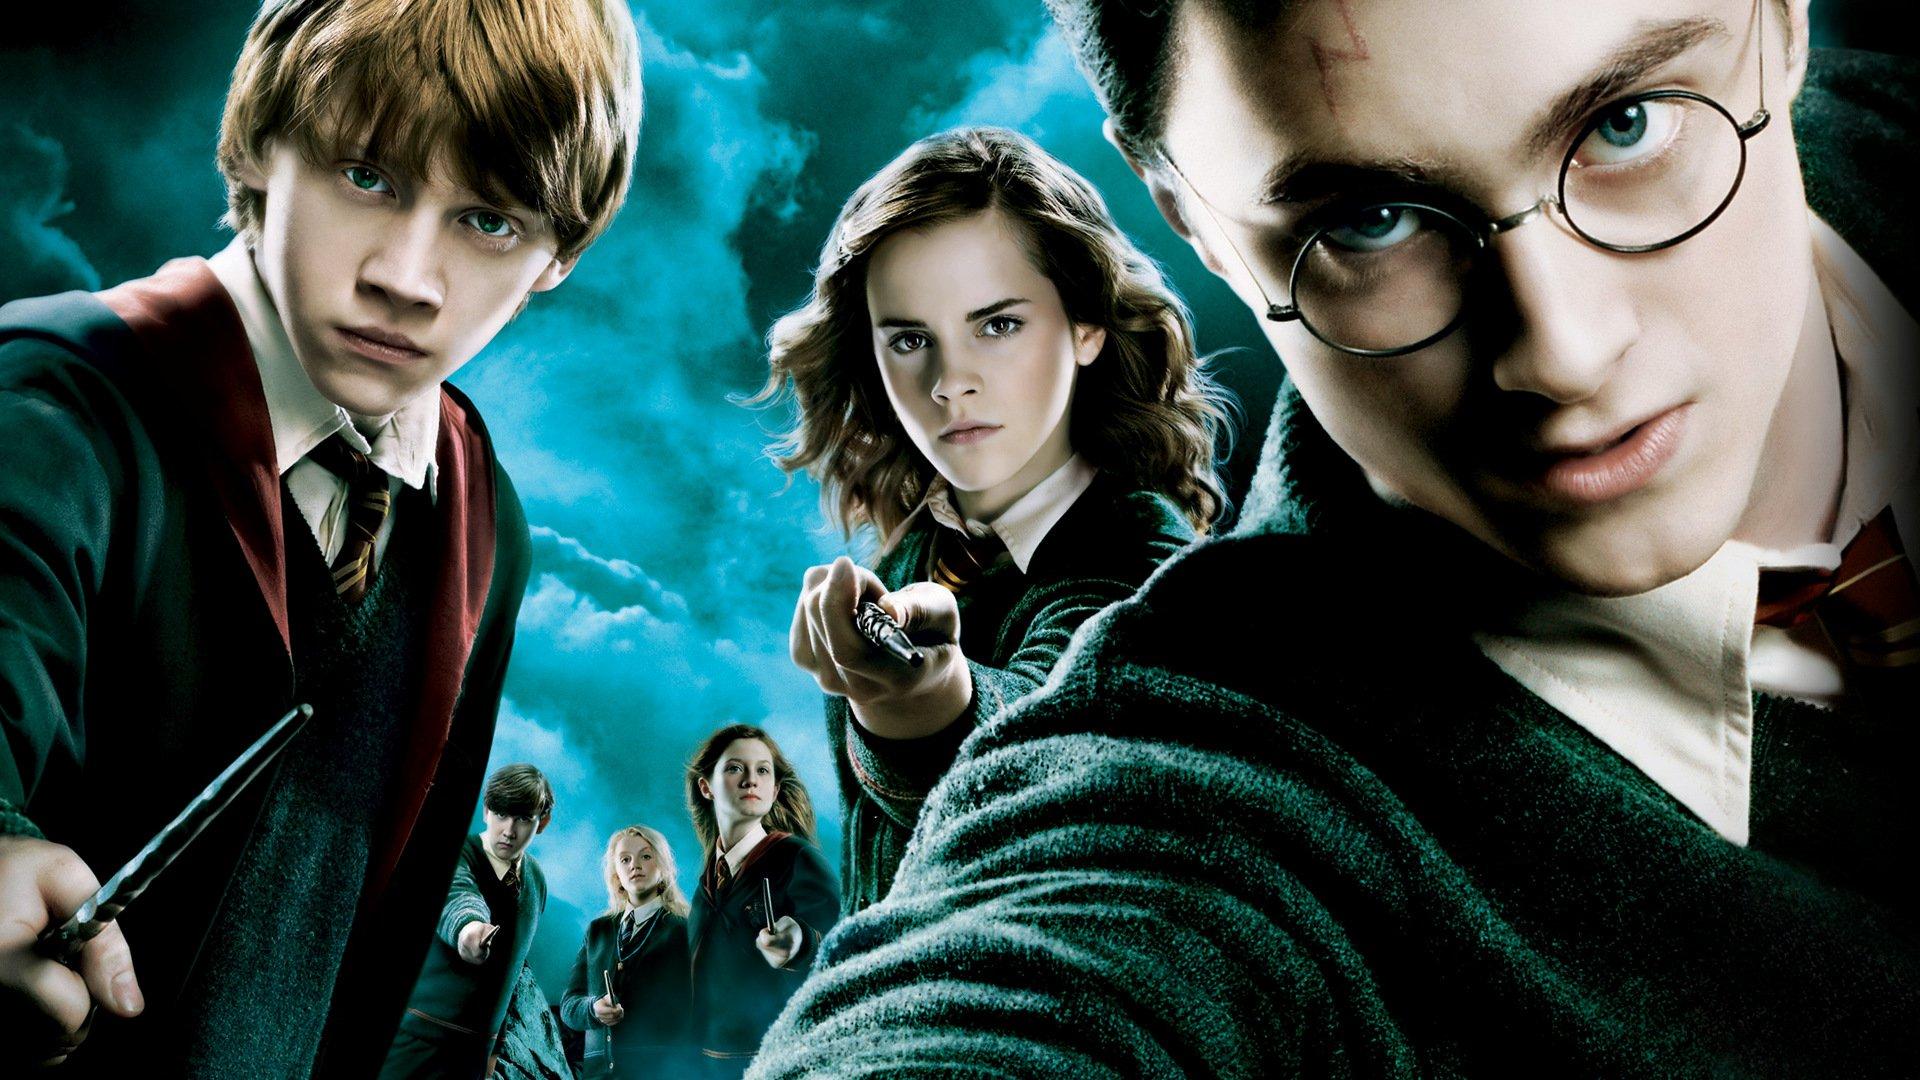 Harry Potter and the Order of the Phoenix HD Wallpaper